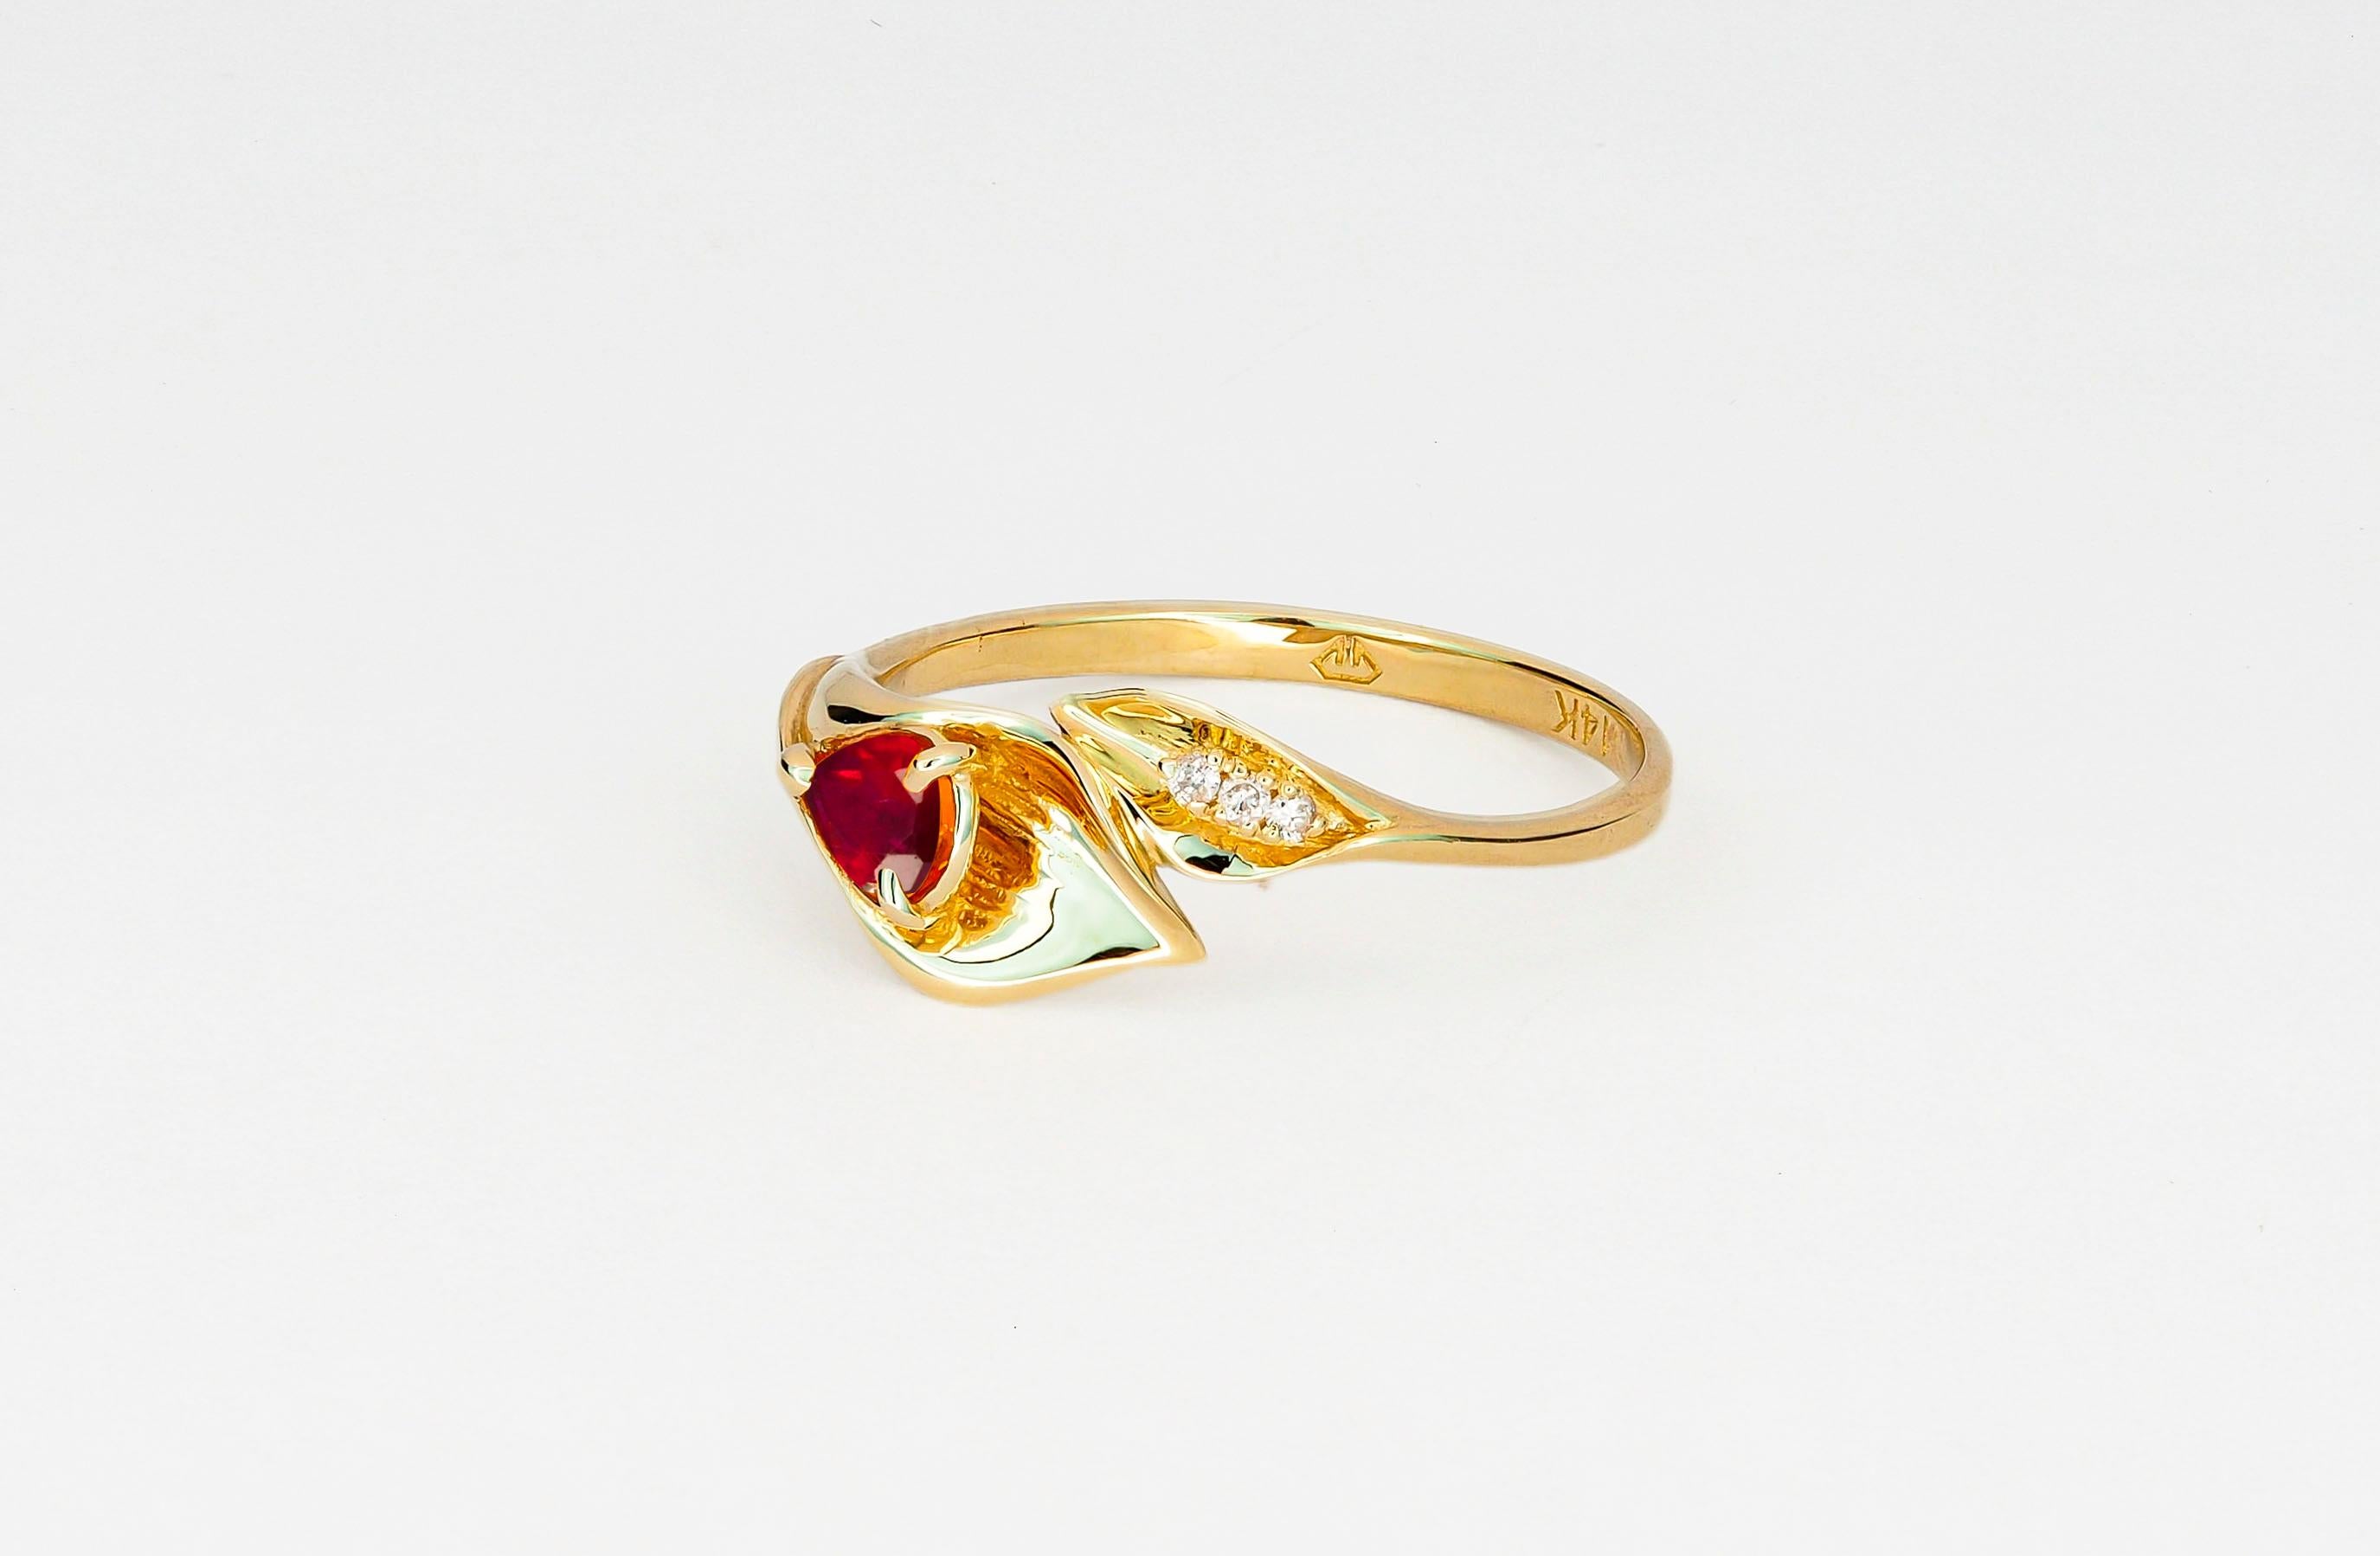 For Sale:  Lily Calla Gold Ring, 14 Karat Gold Ring with Ruby and Diamonds! 4